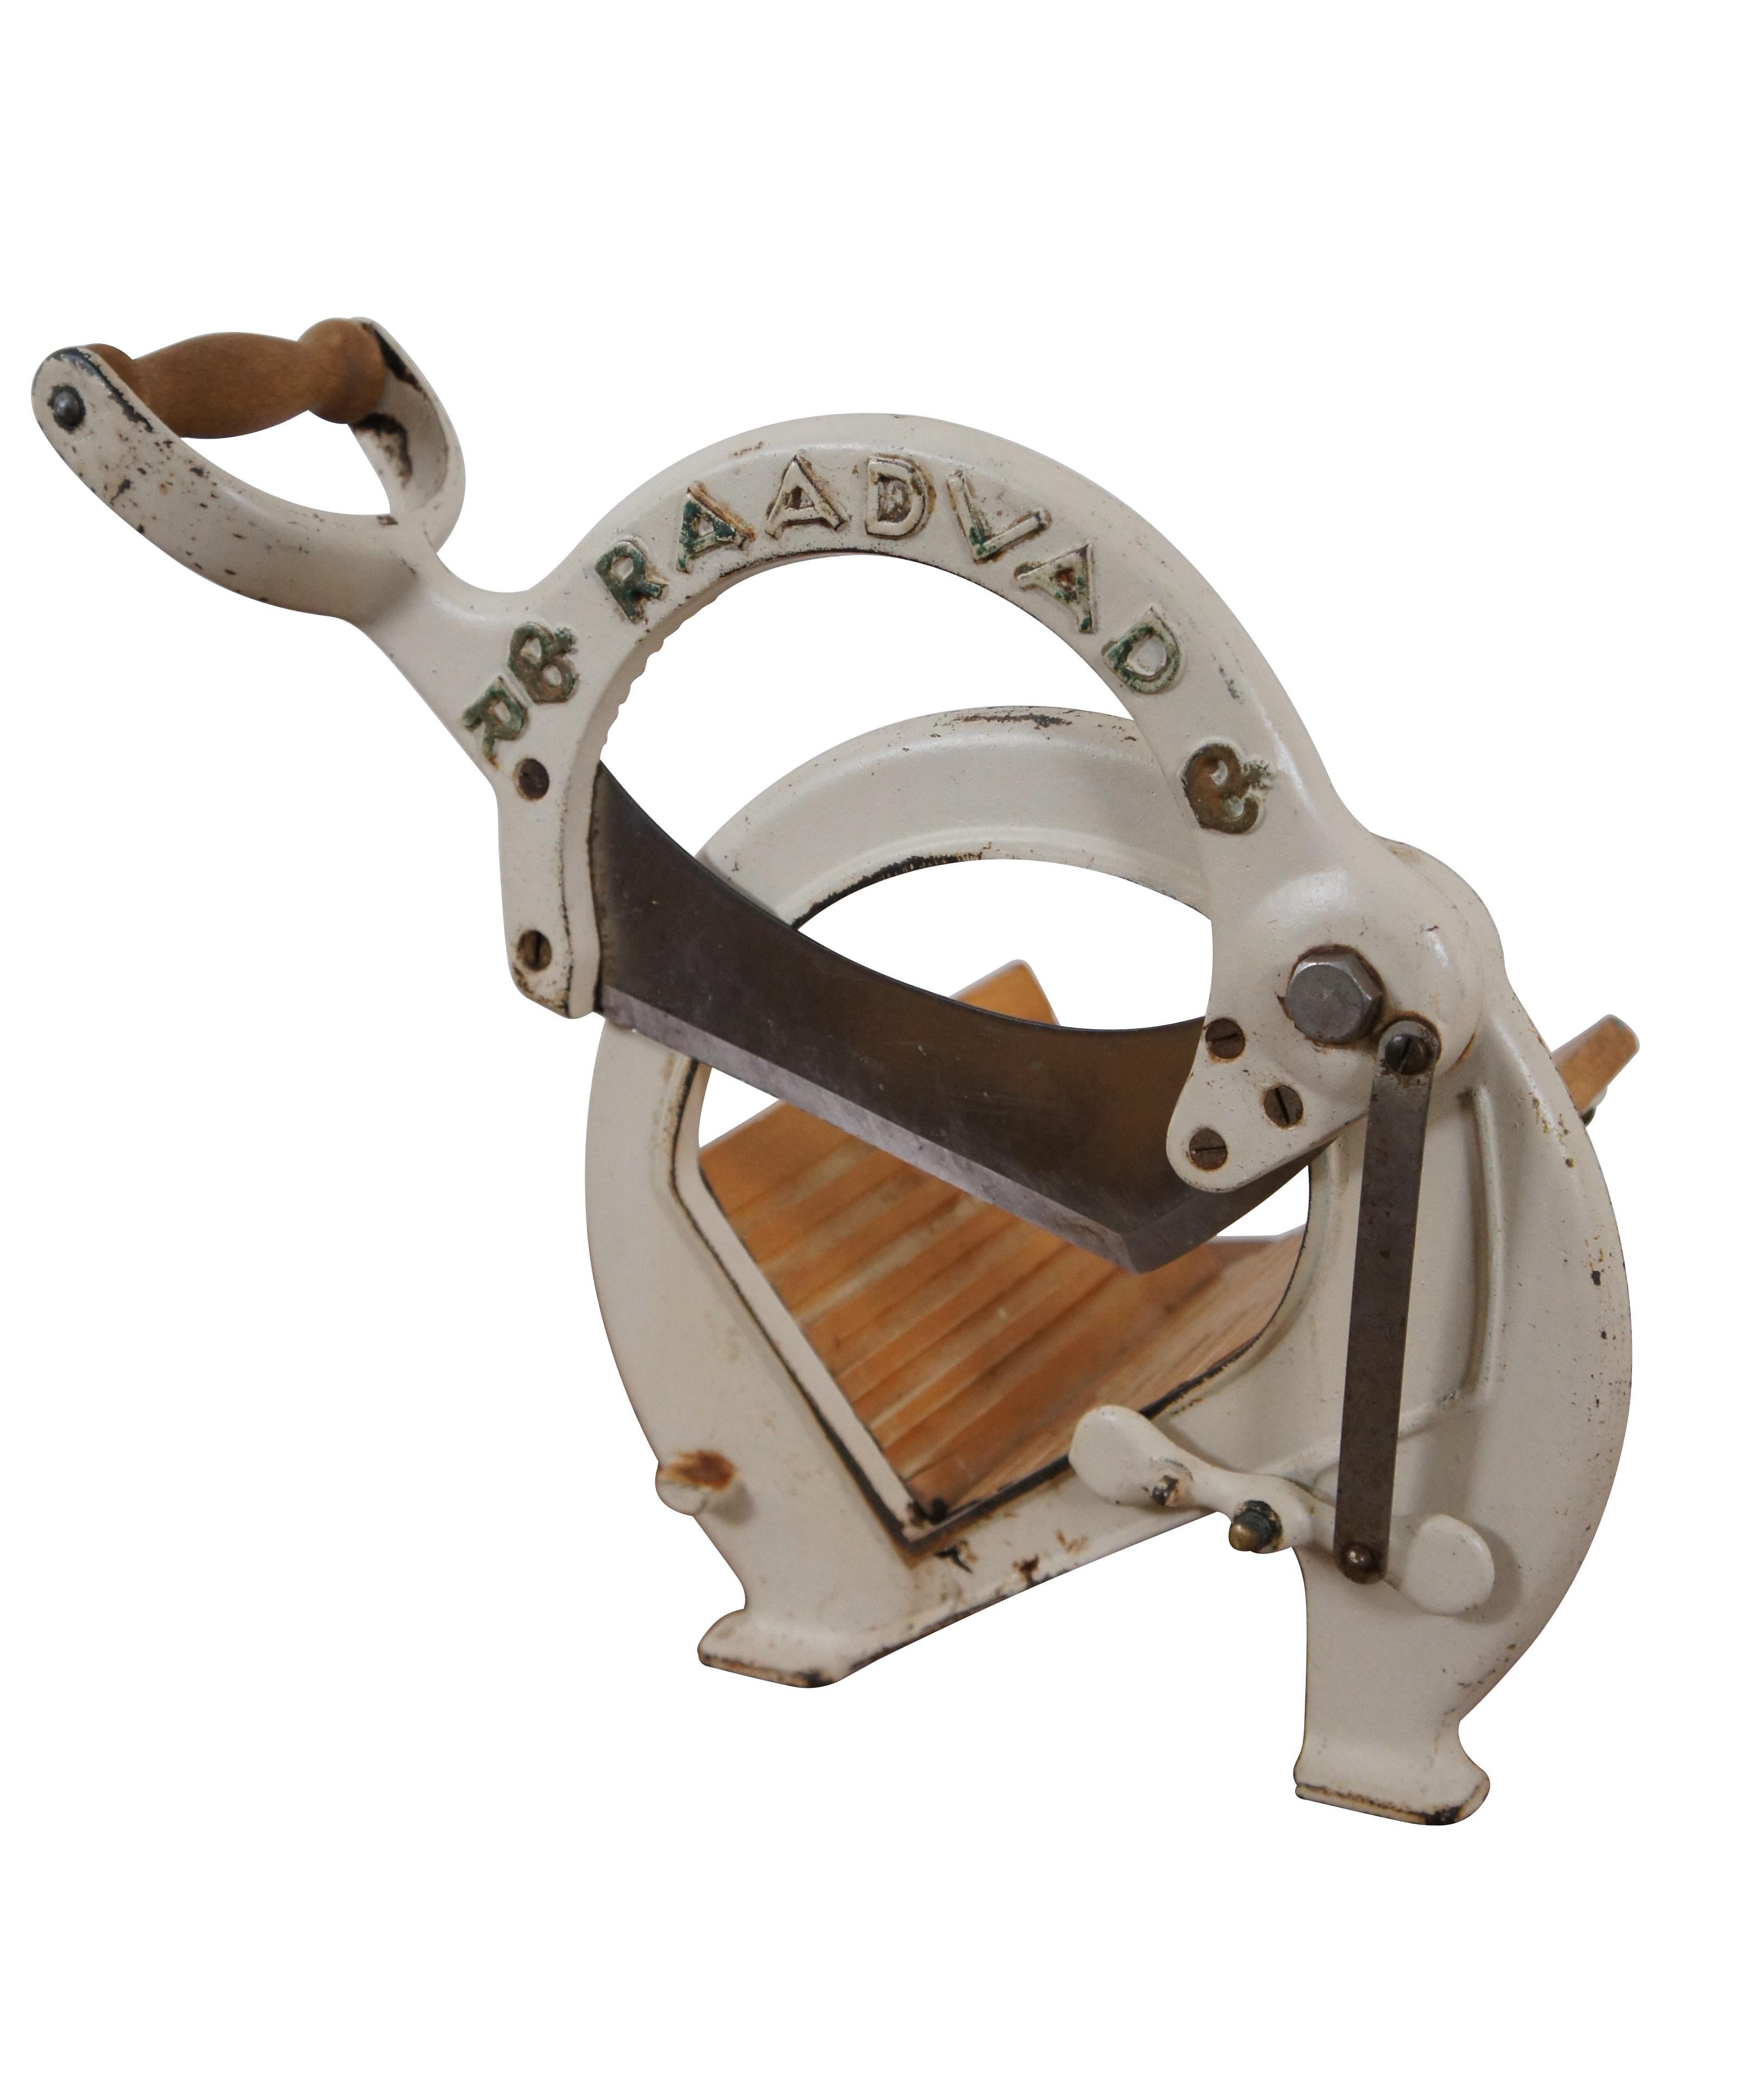 Mid to early 20th century off-white painted wood and iron bread slicer produced by Danish company Raadvad. Designed by Ove Larsen in the 1930's and produced from the 1940s-1970s.

